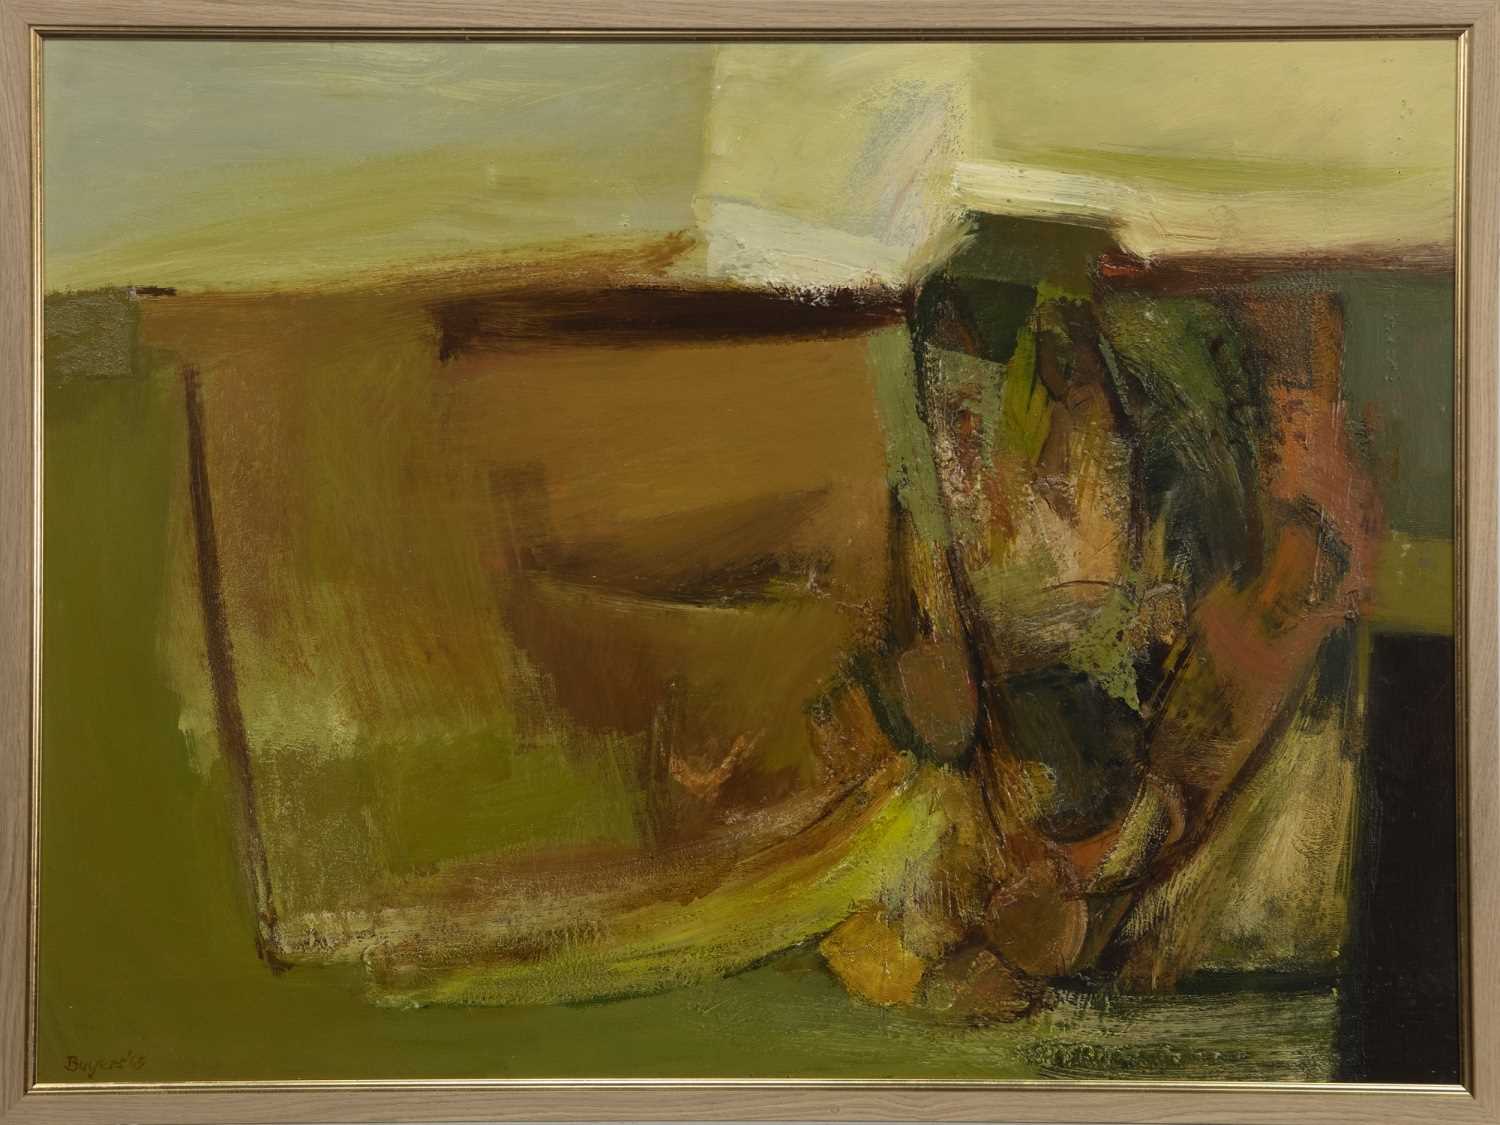 BOULDERS, AN OIL BY DONALD MORRISON BUYERS